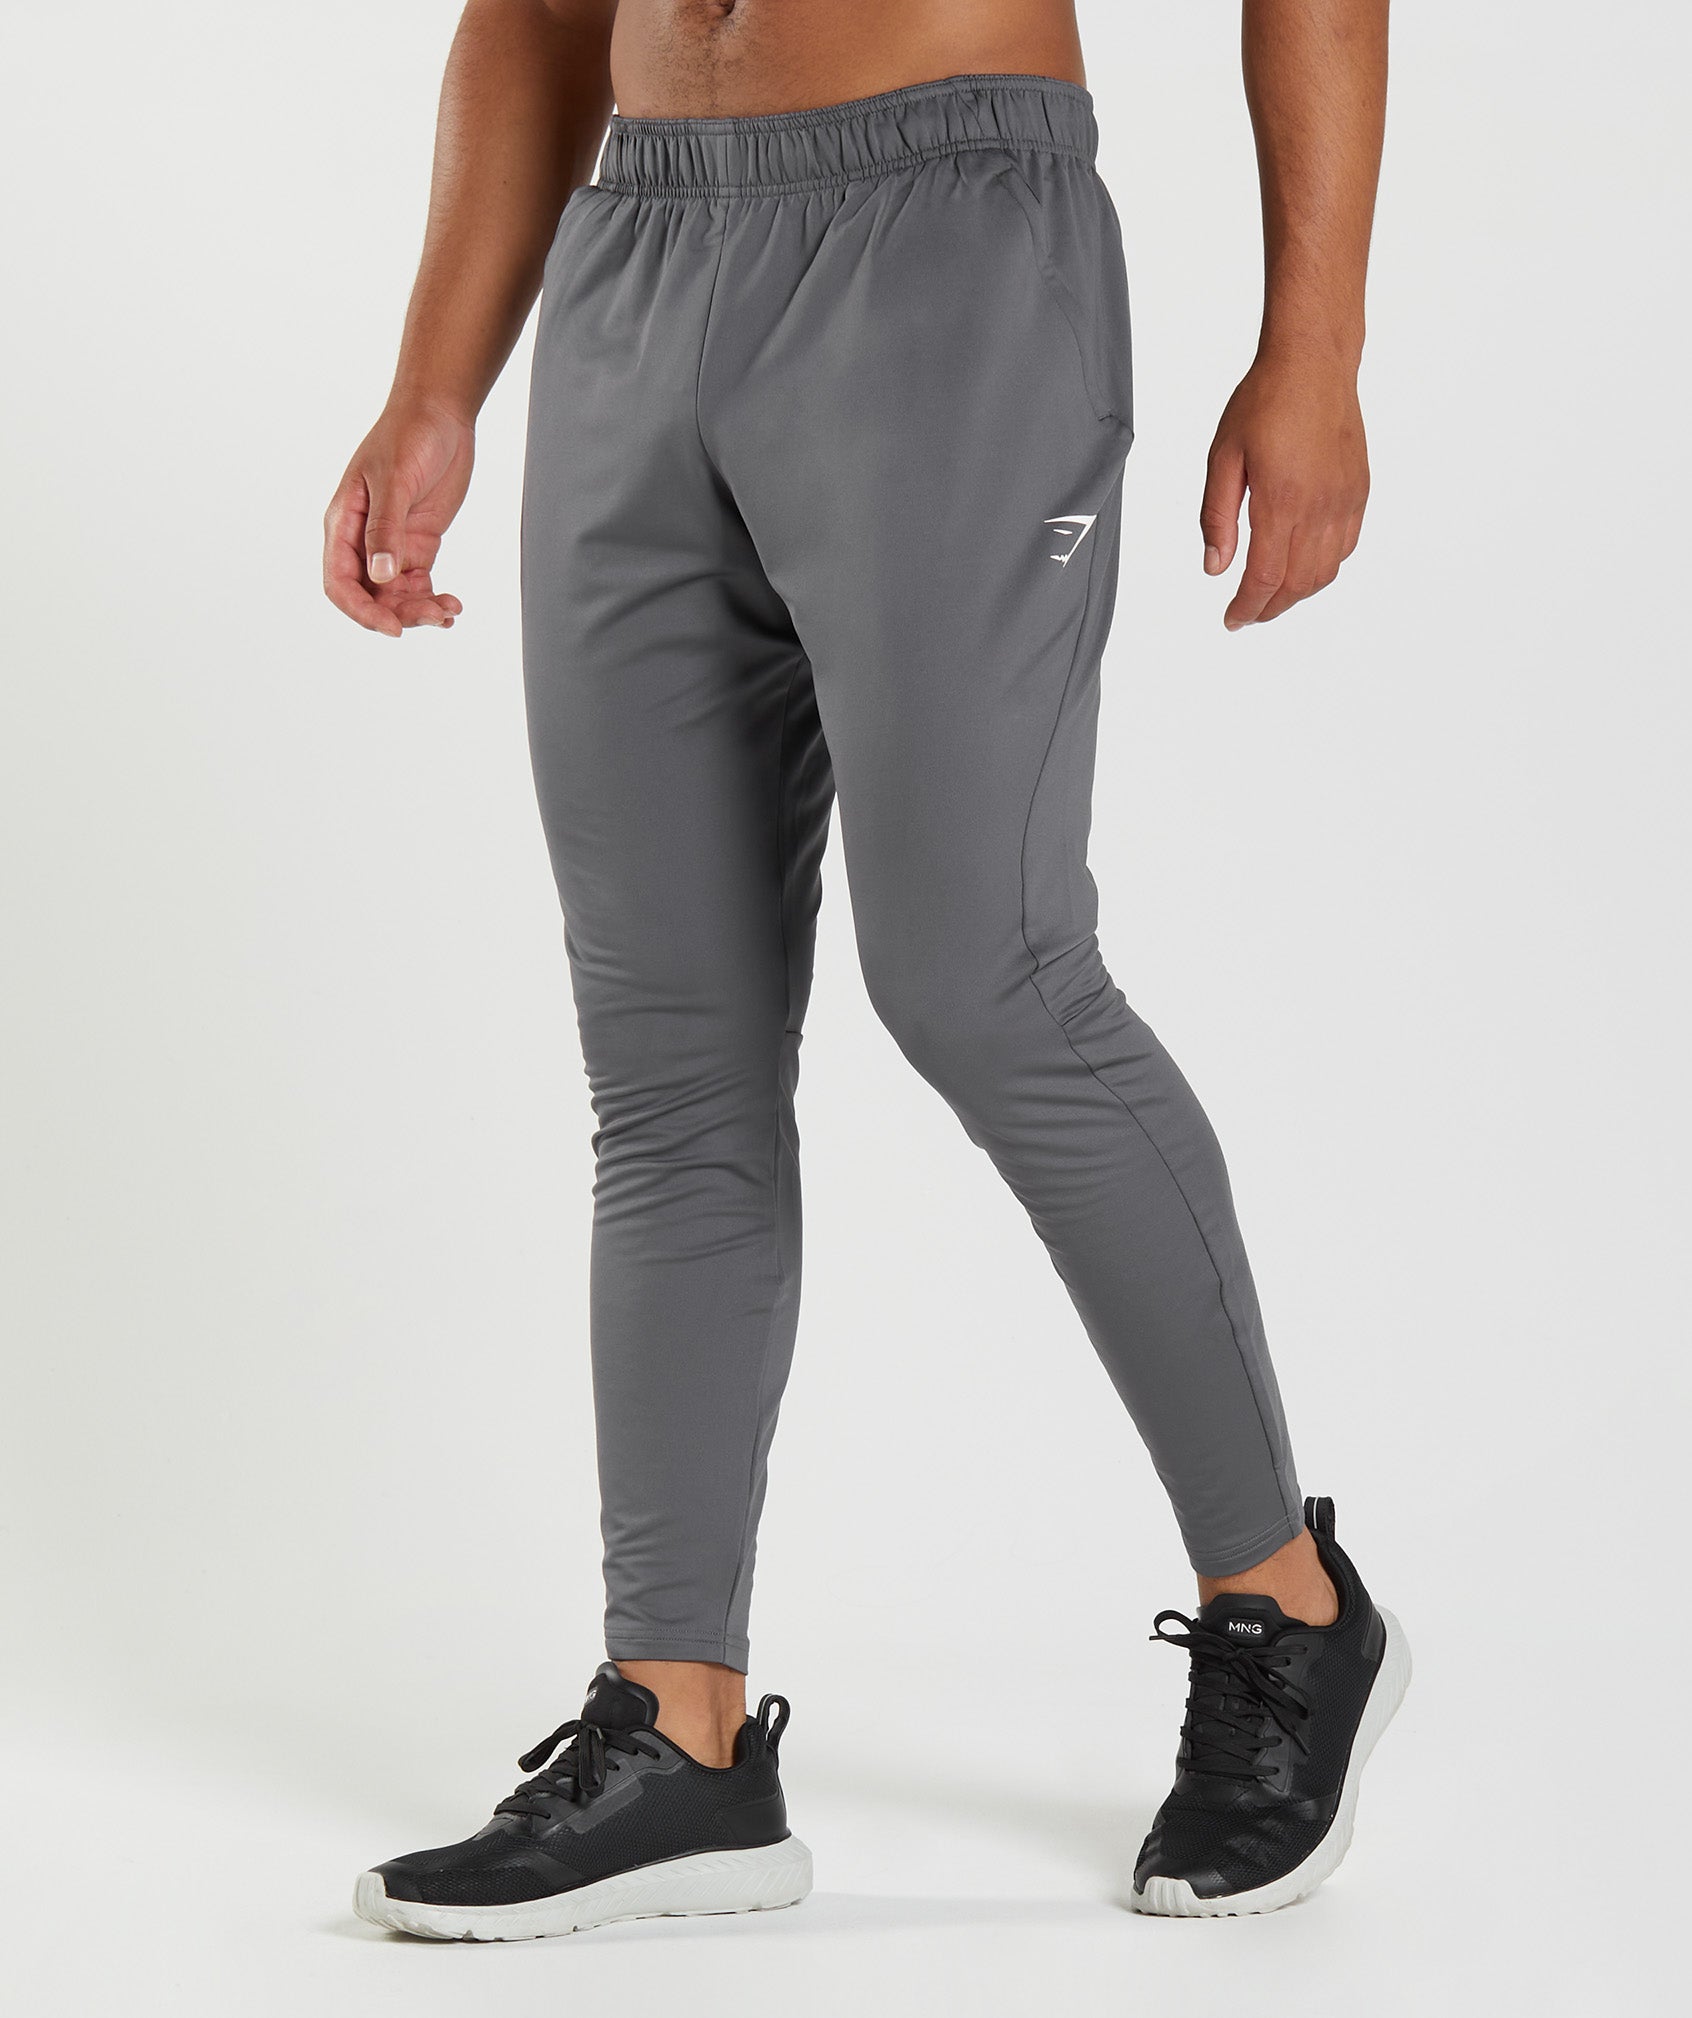 Gymshark Crest Joggers Black Size M - $20 (33% Off Retail) - From Pascal